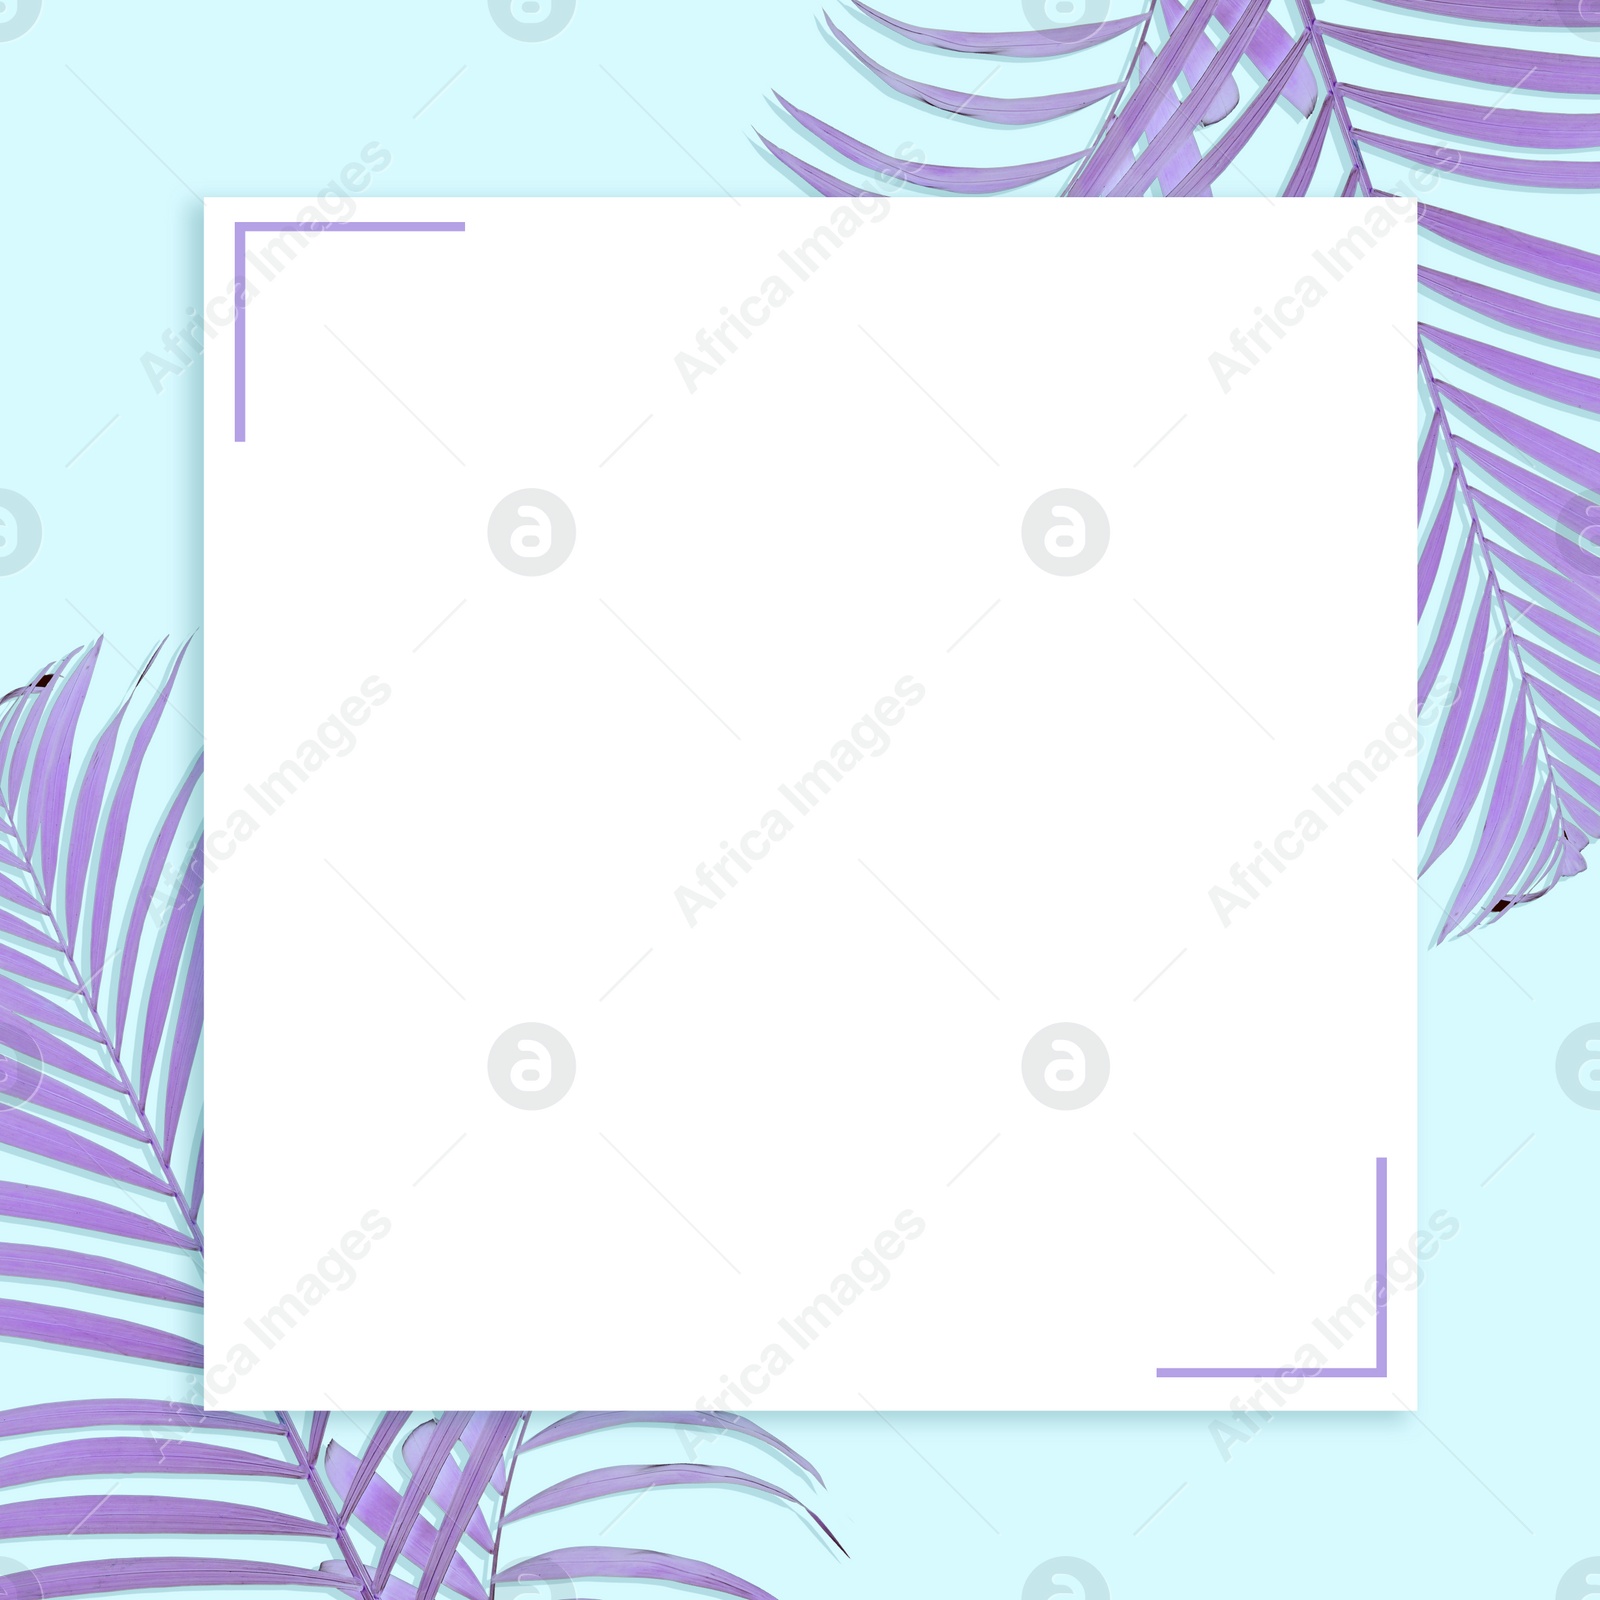 Image of Blank card and colorful tropical leaves on light blue background, flat lay. Creative design